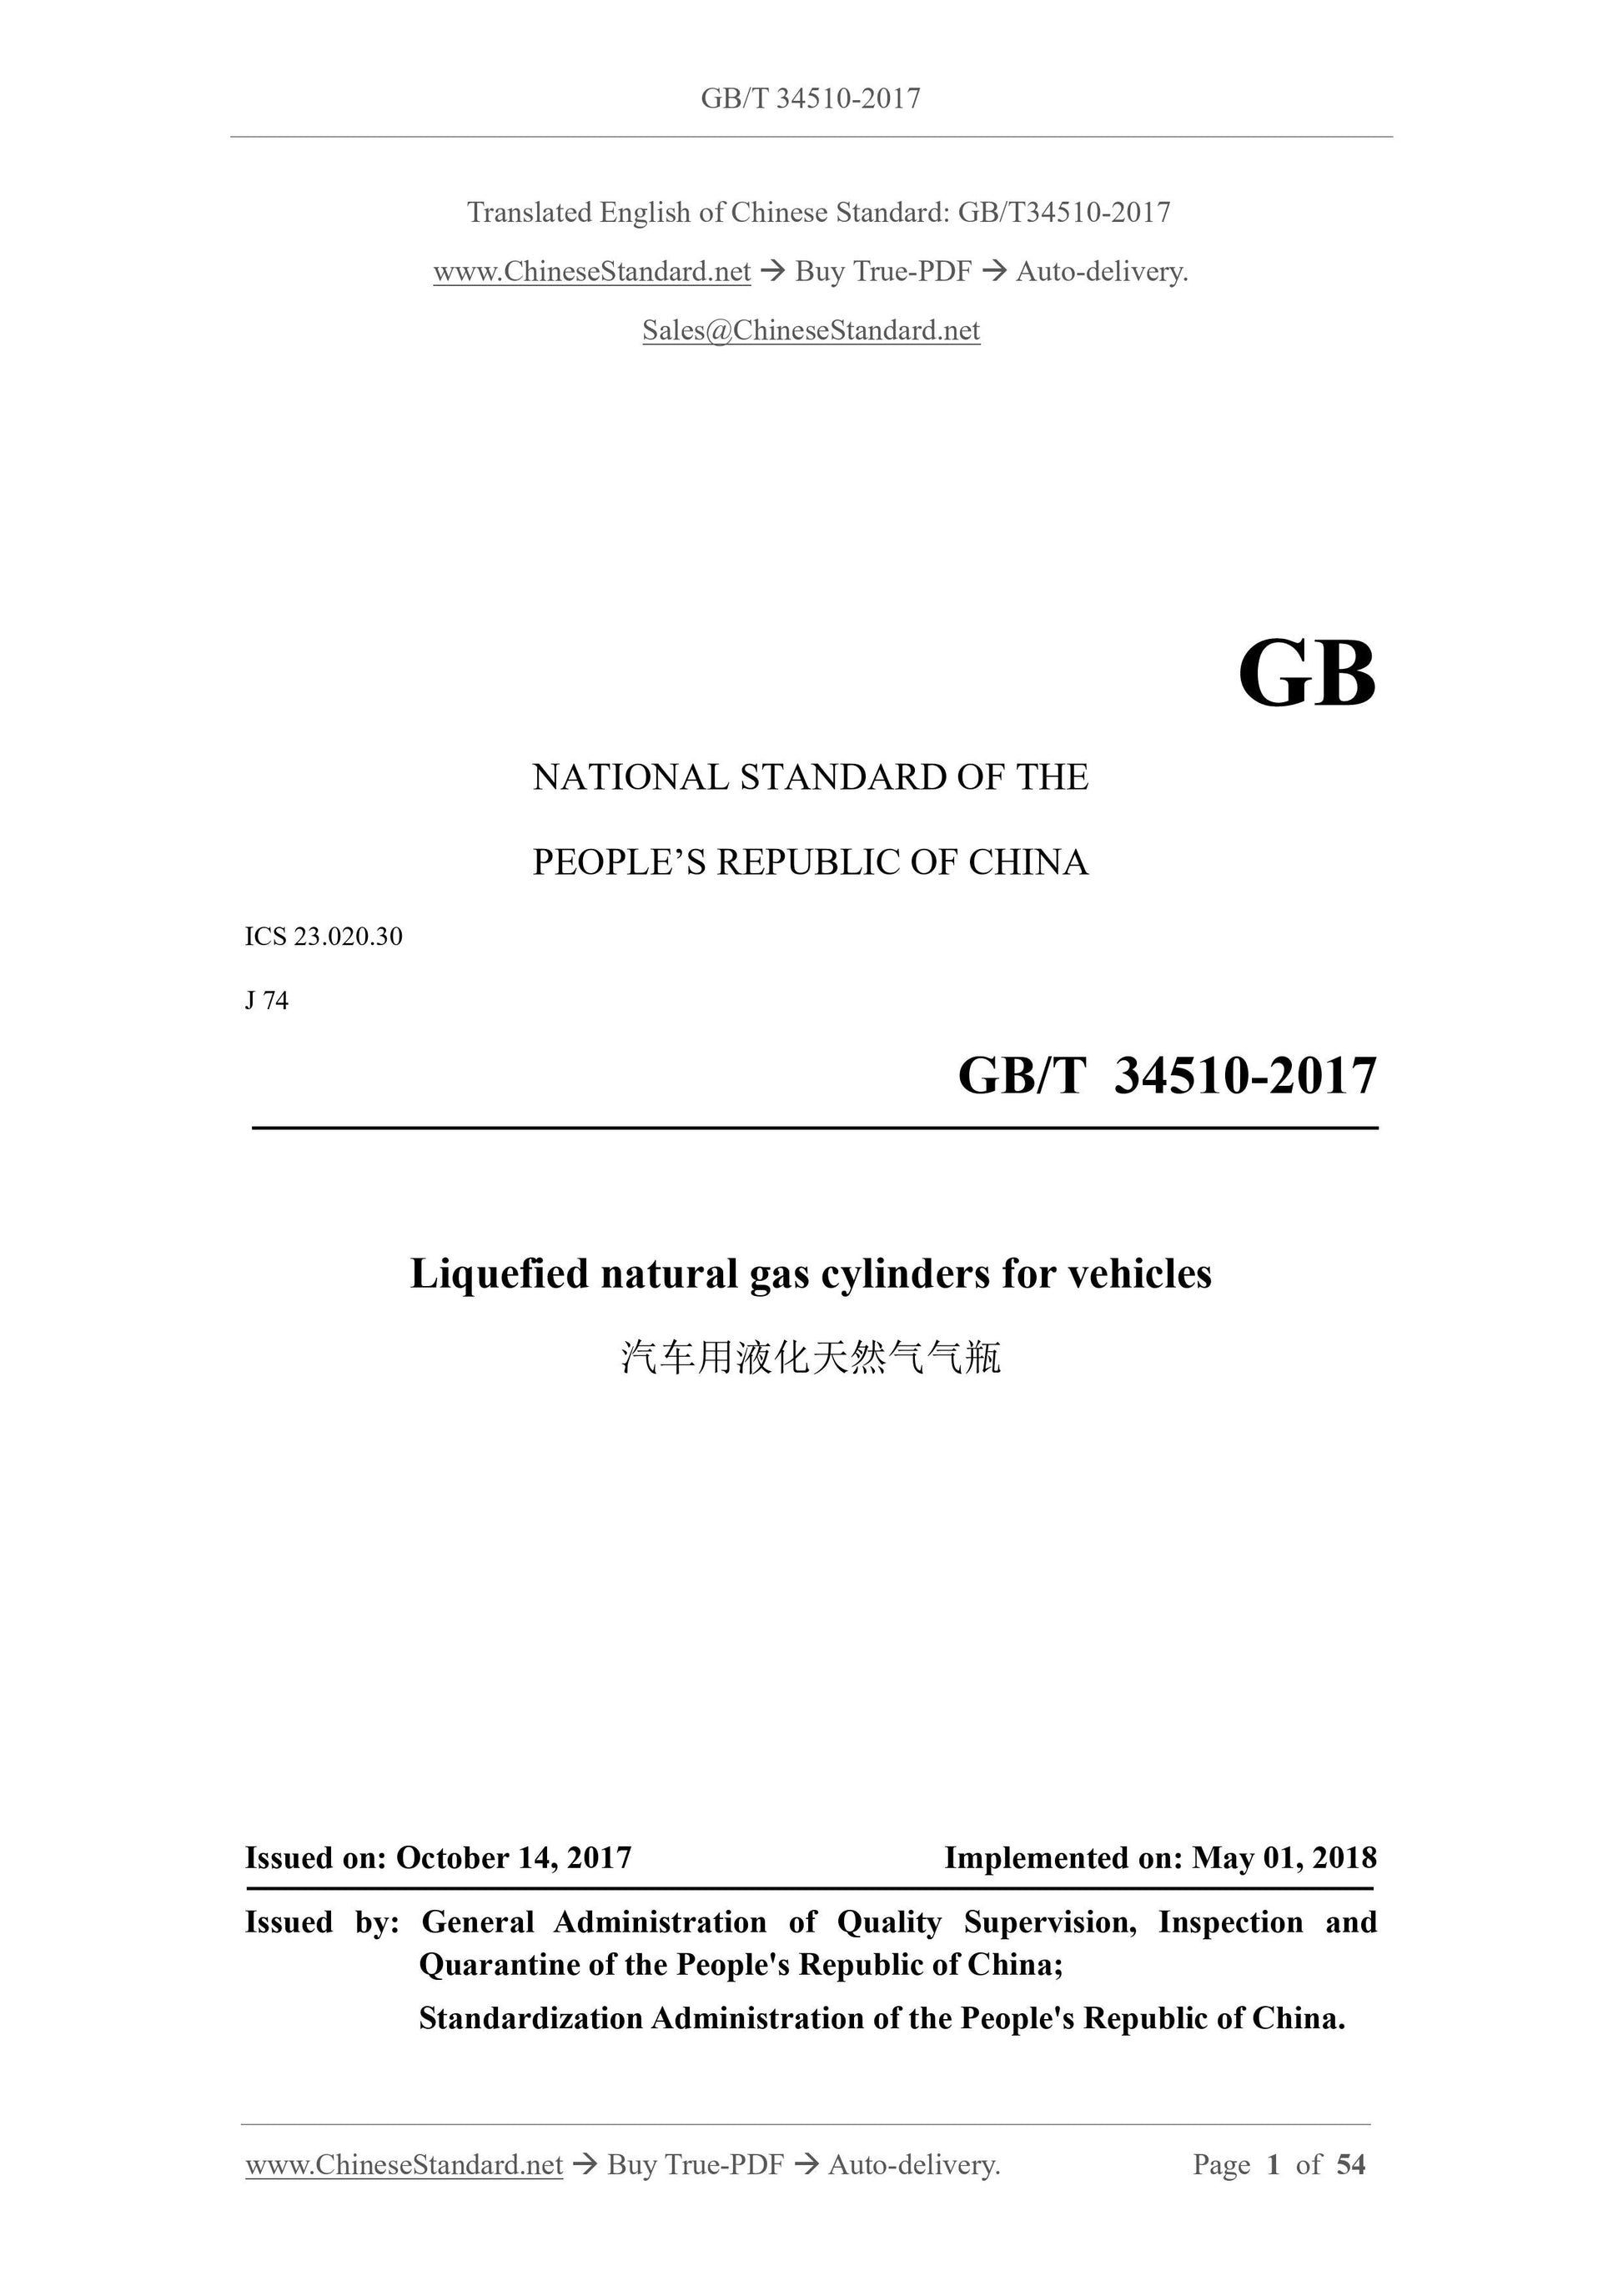 GB/T 34510-2017 Page 1